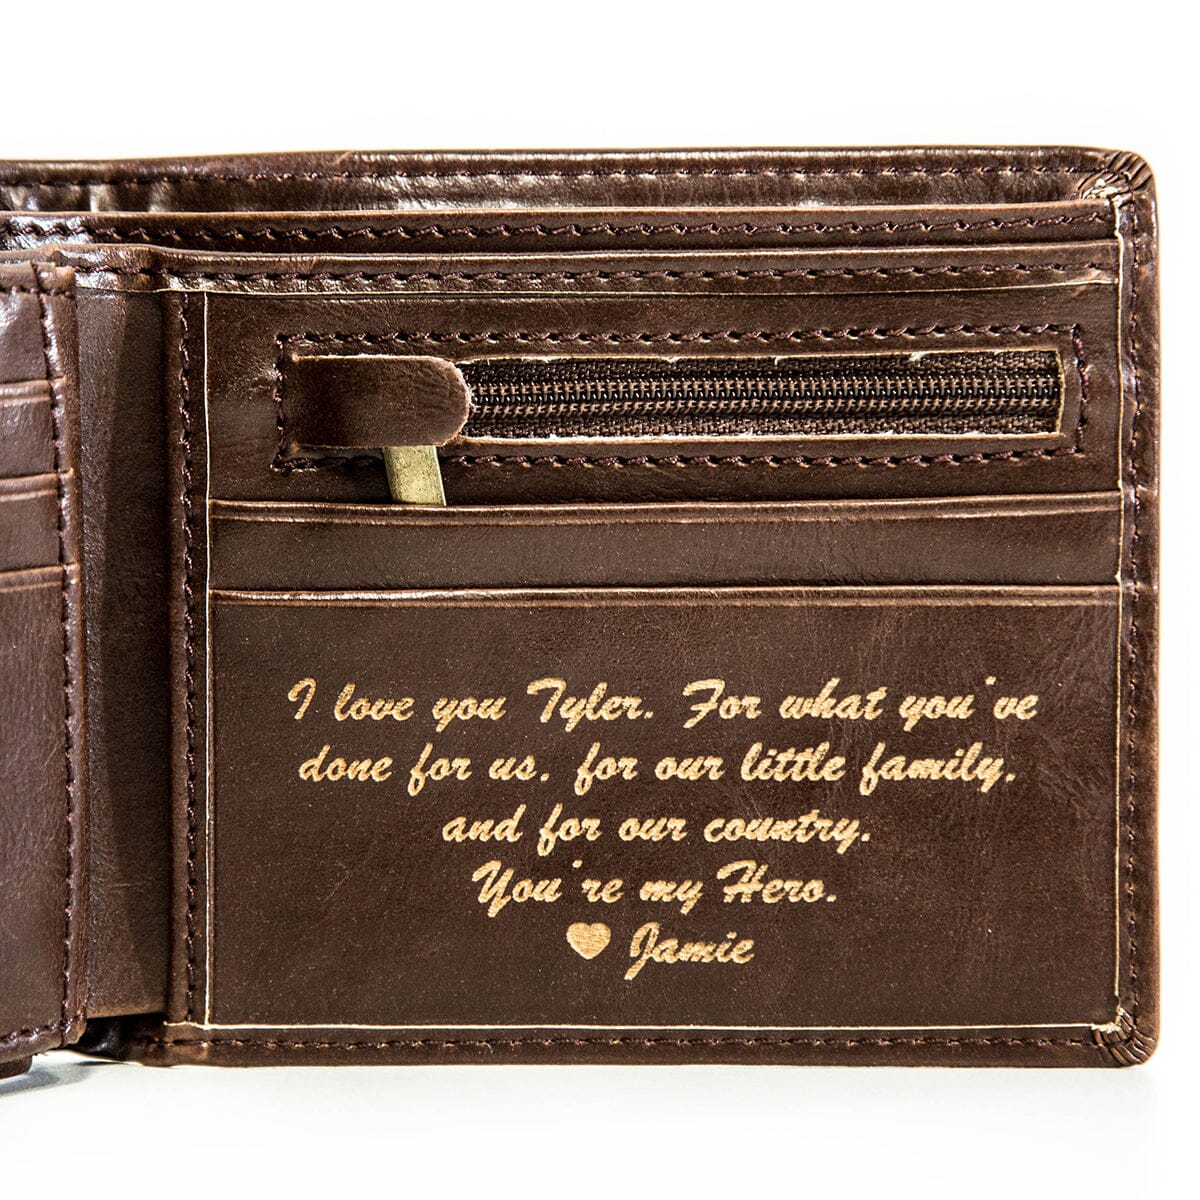 Buy Personalized Personalized Leather Wallet,Shop Personalized Personalized Leather Wallet,Shop Personalized Personalized Leather Wallet online,Personalized Father`s Day Gifts, Personalized Gifts for Dad, Personalized Gifts For Him, Personalized Groomsmen Gifts, 